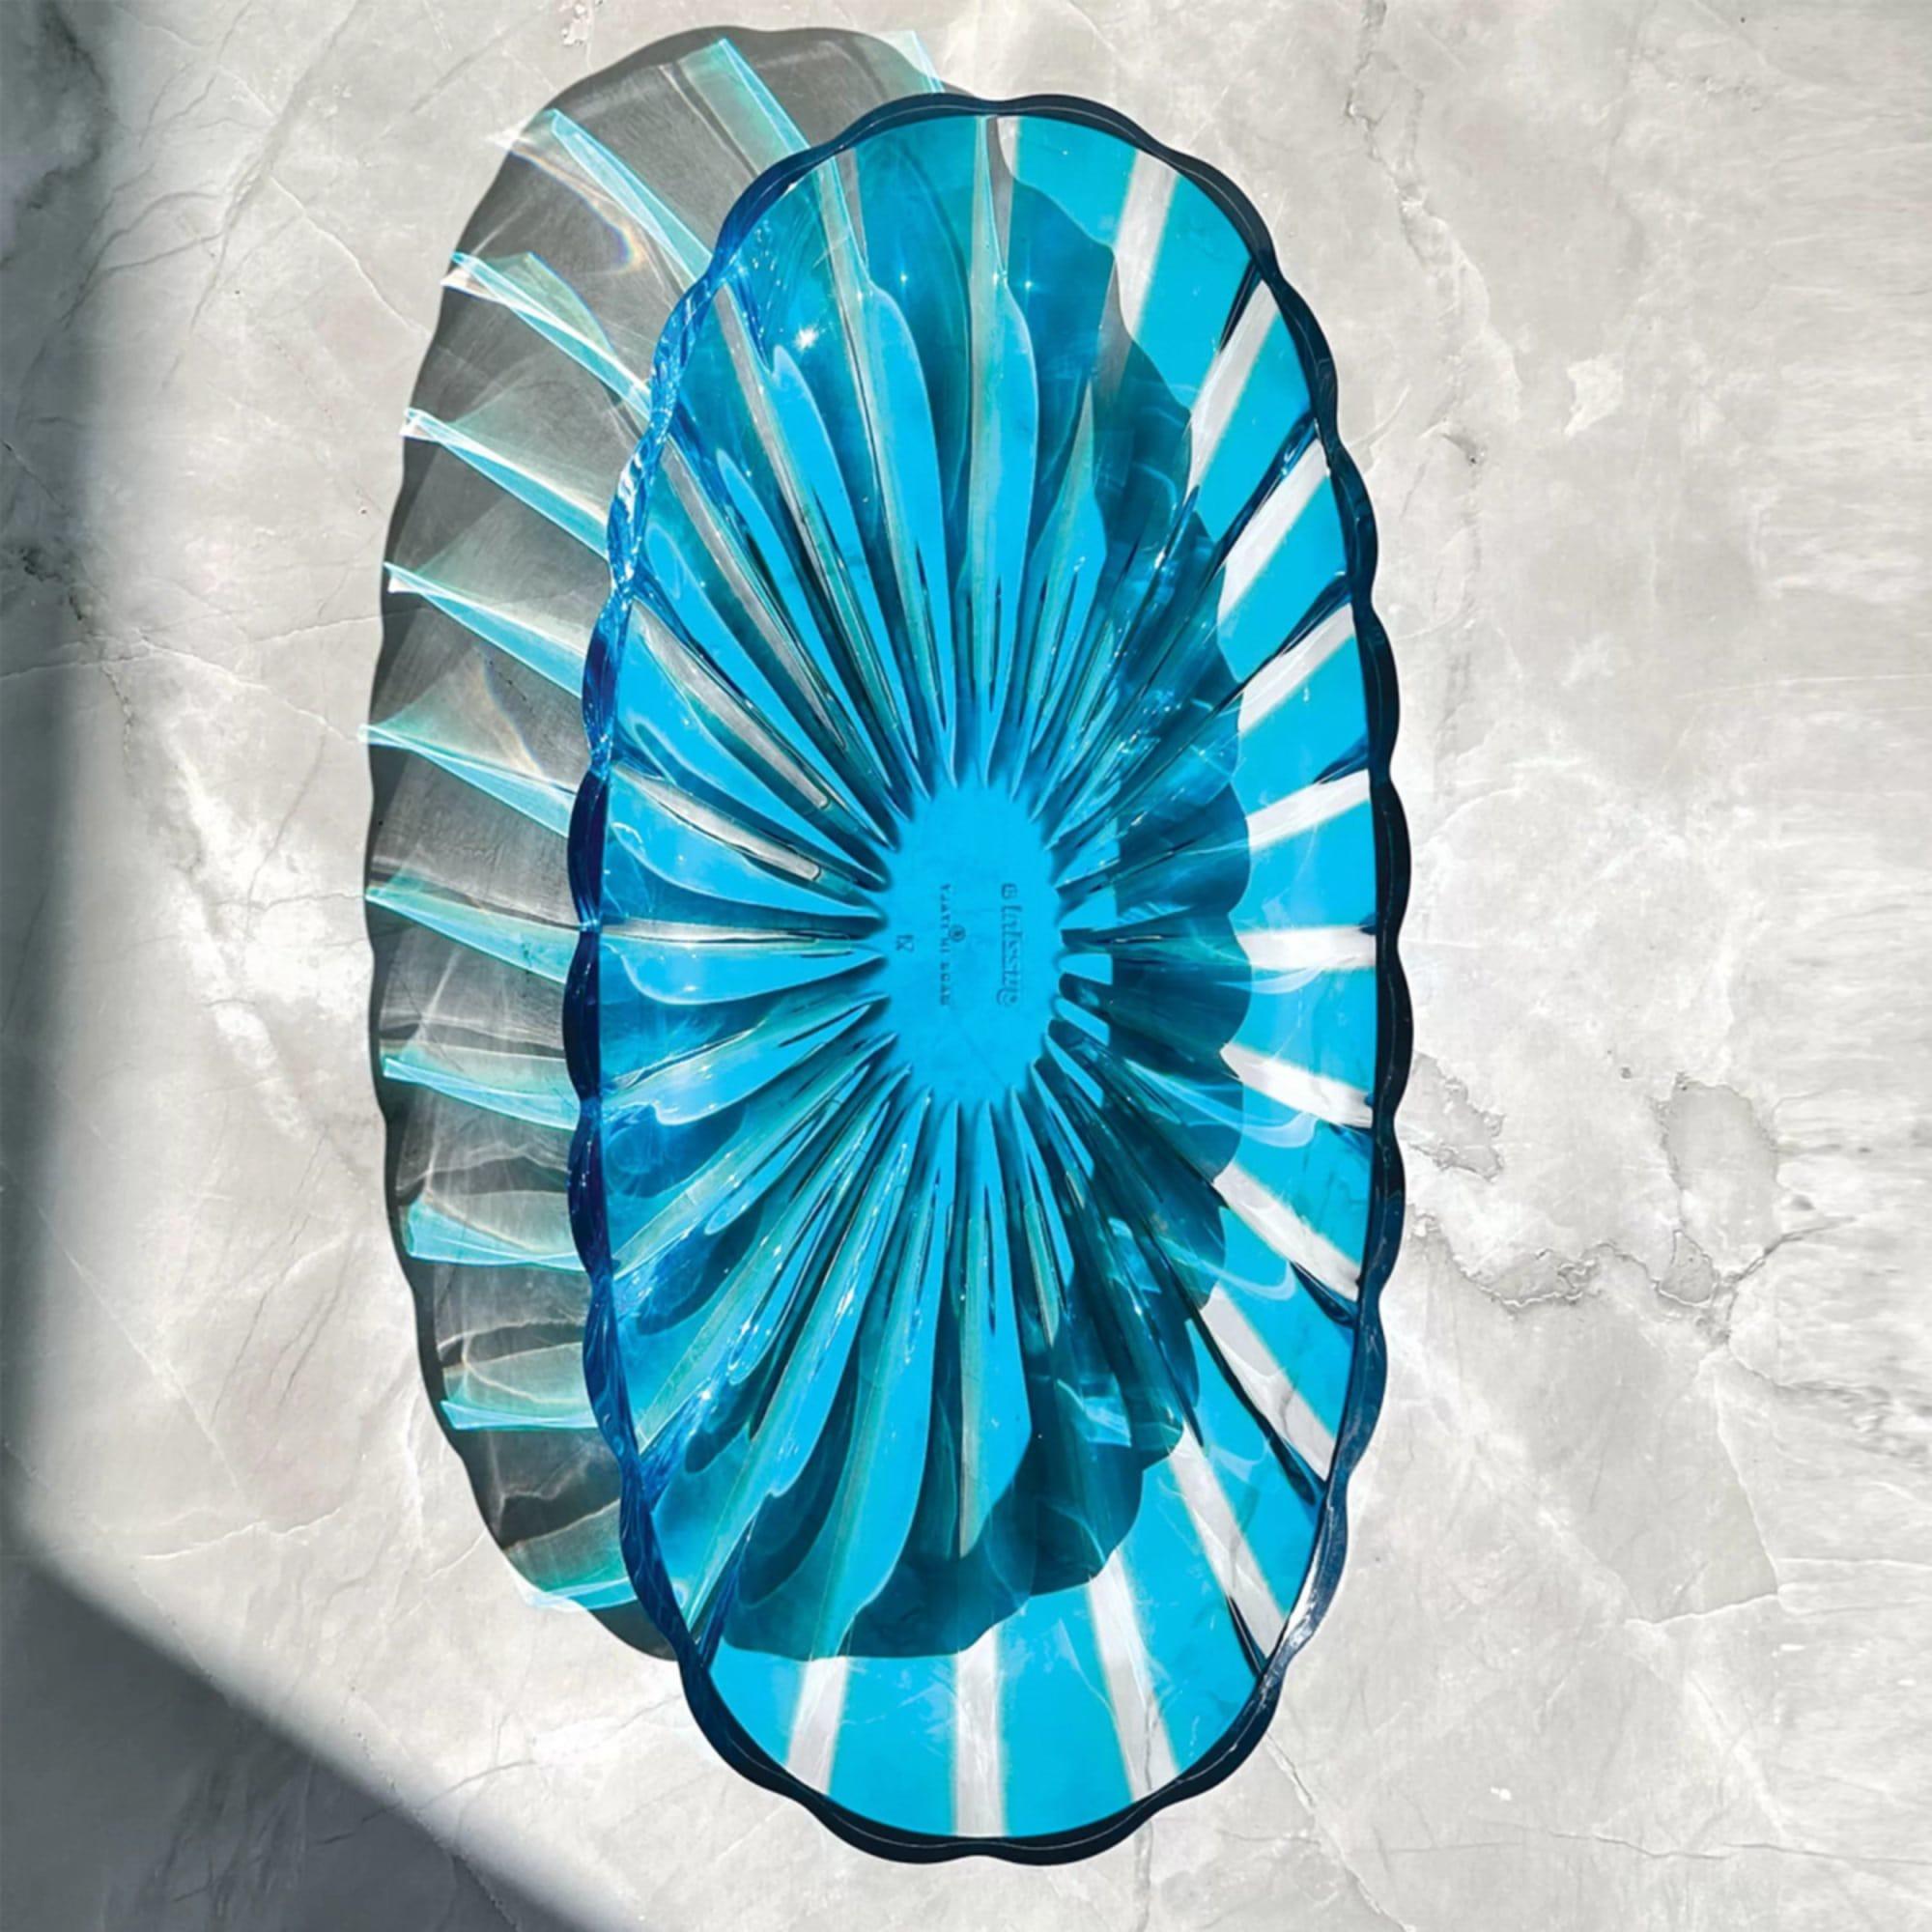 Guzzini Dolcevita Oval Serving Tray 38x19cm Turquoise Image 3